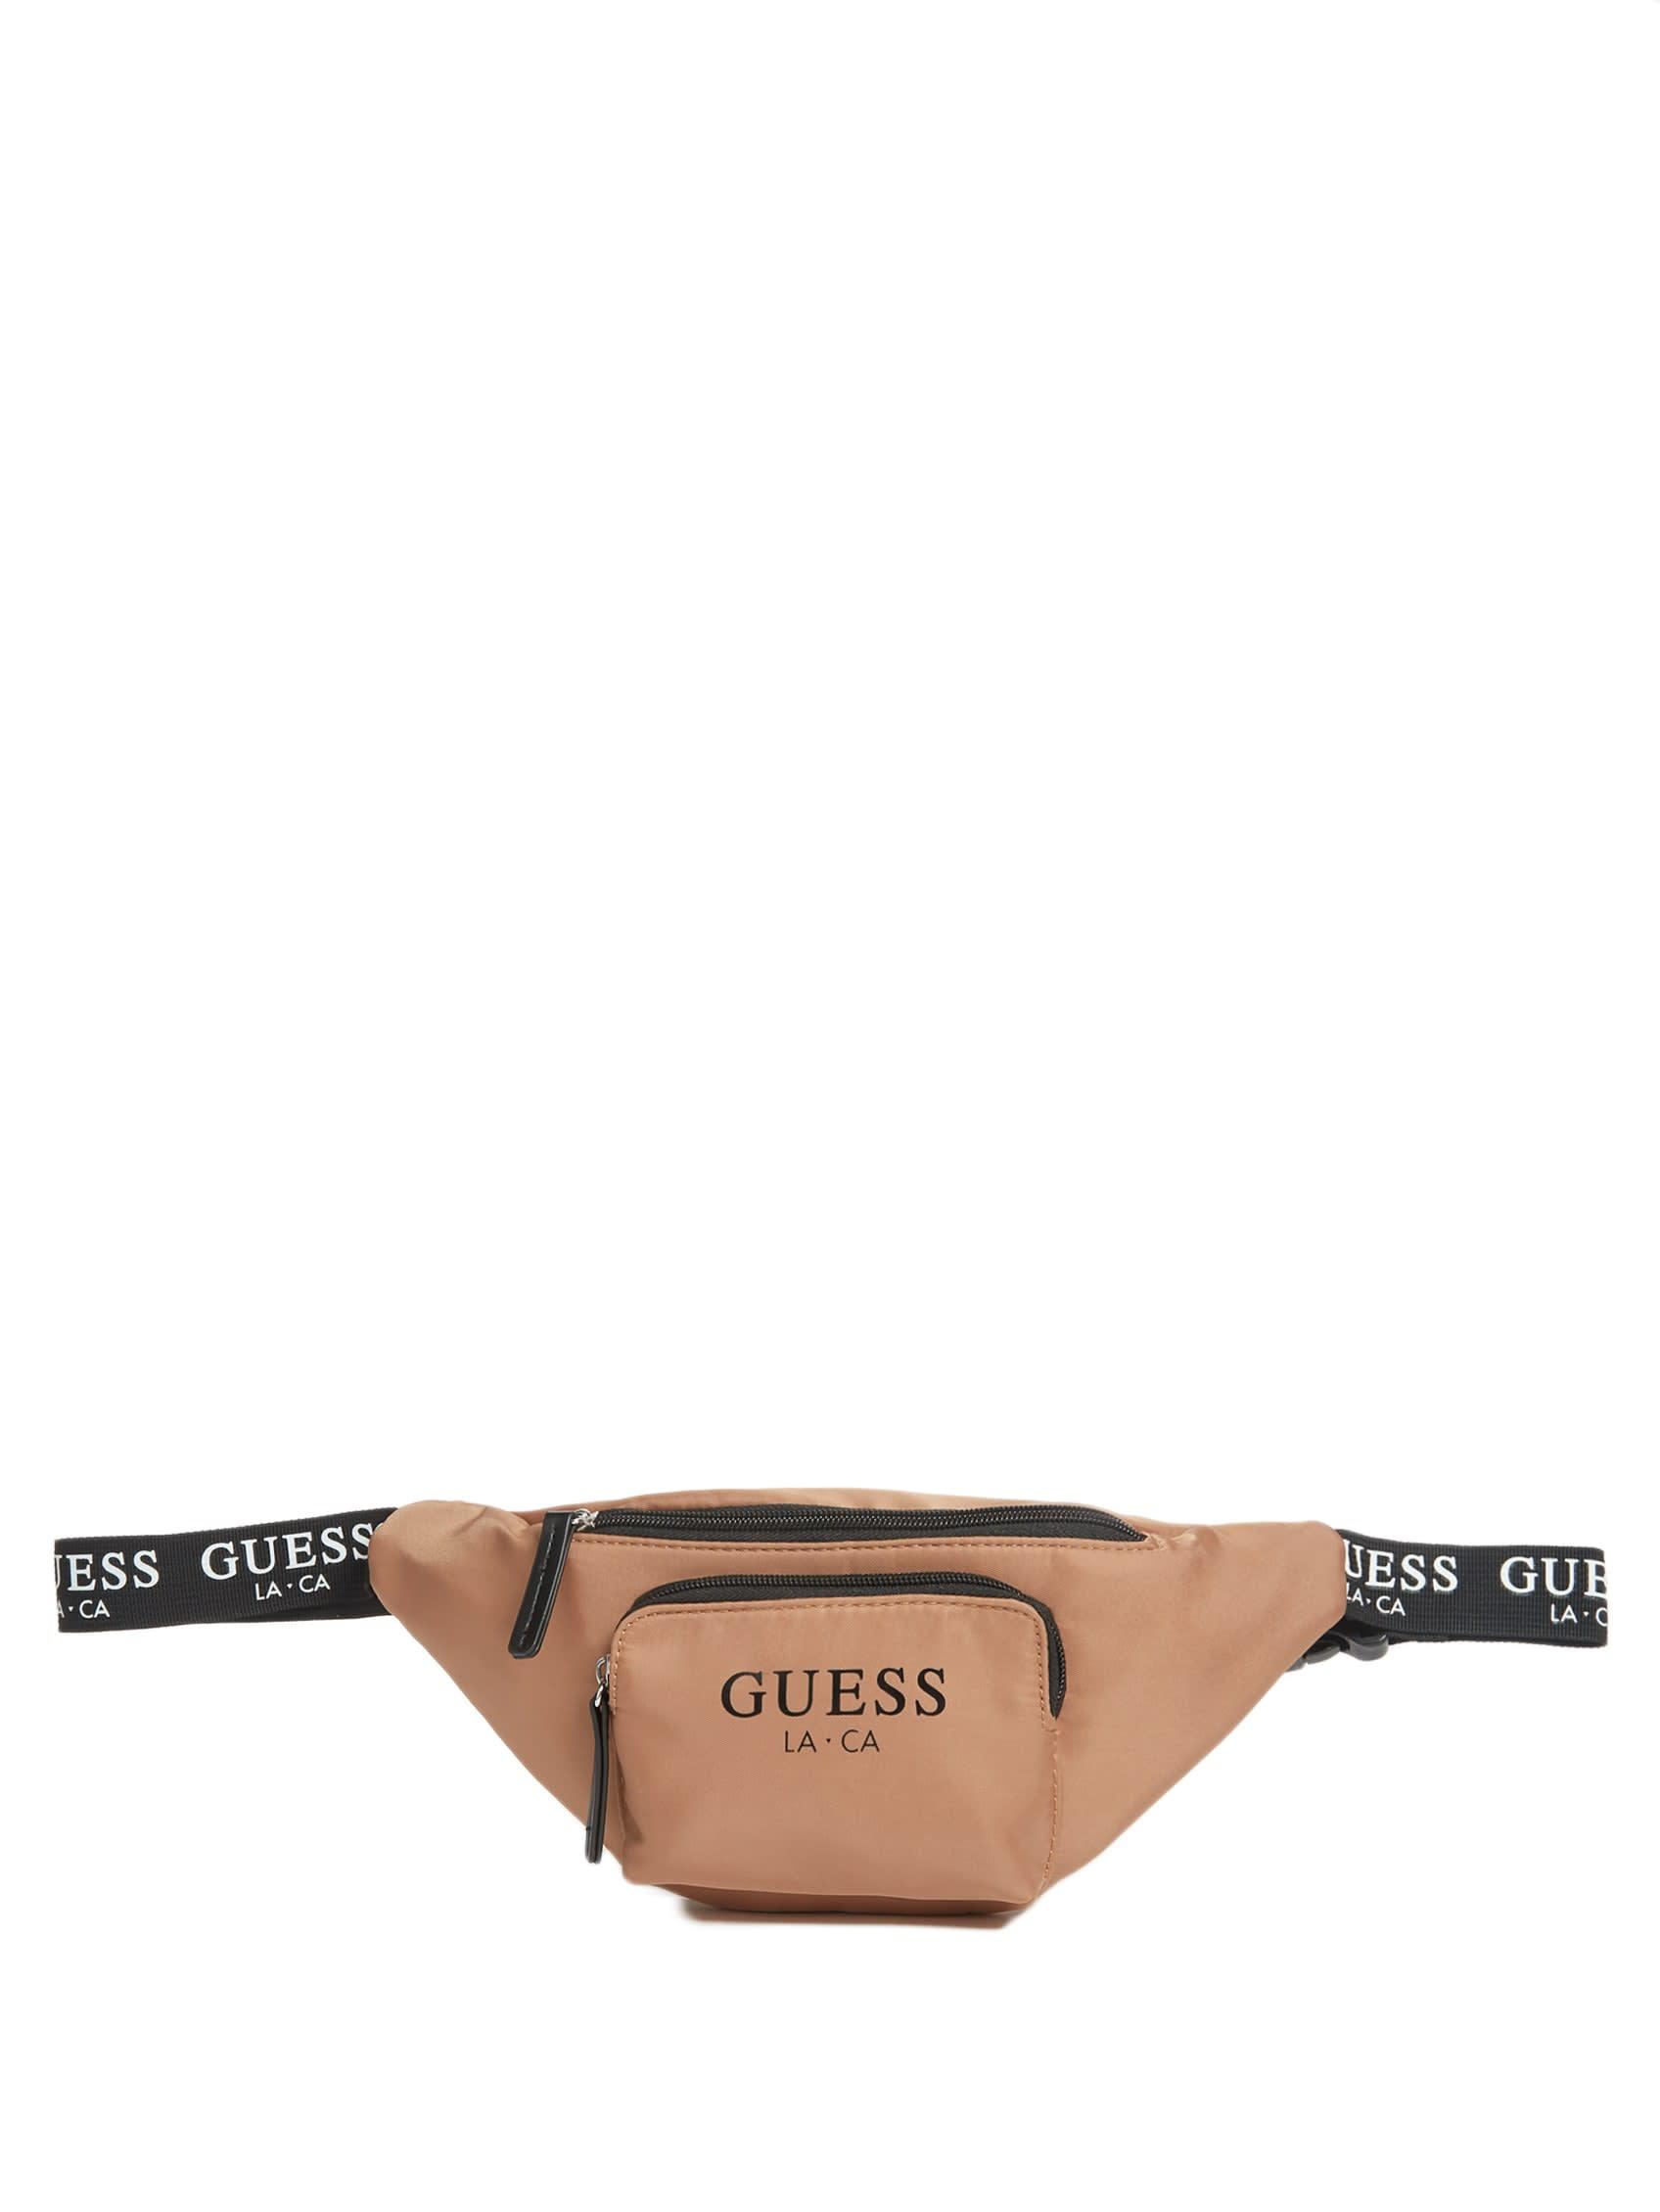 Guess Factory Logo Tape Fanny Pack in Natural | Lyst